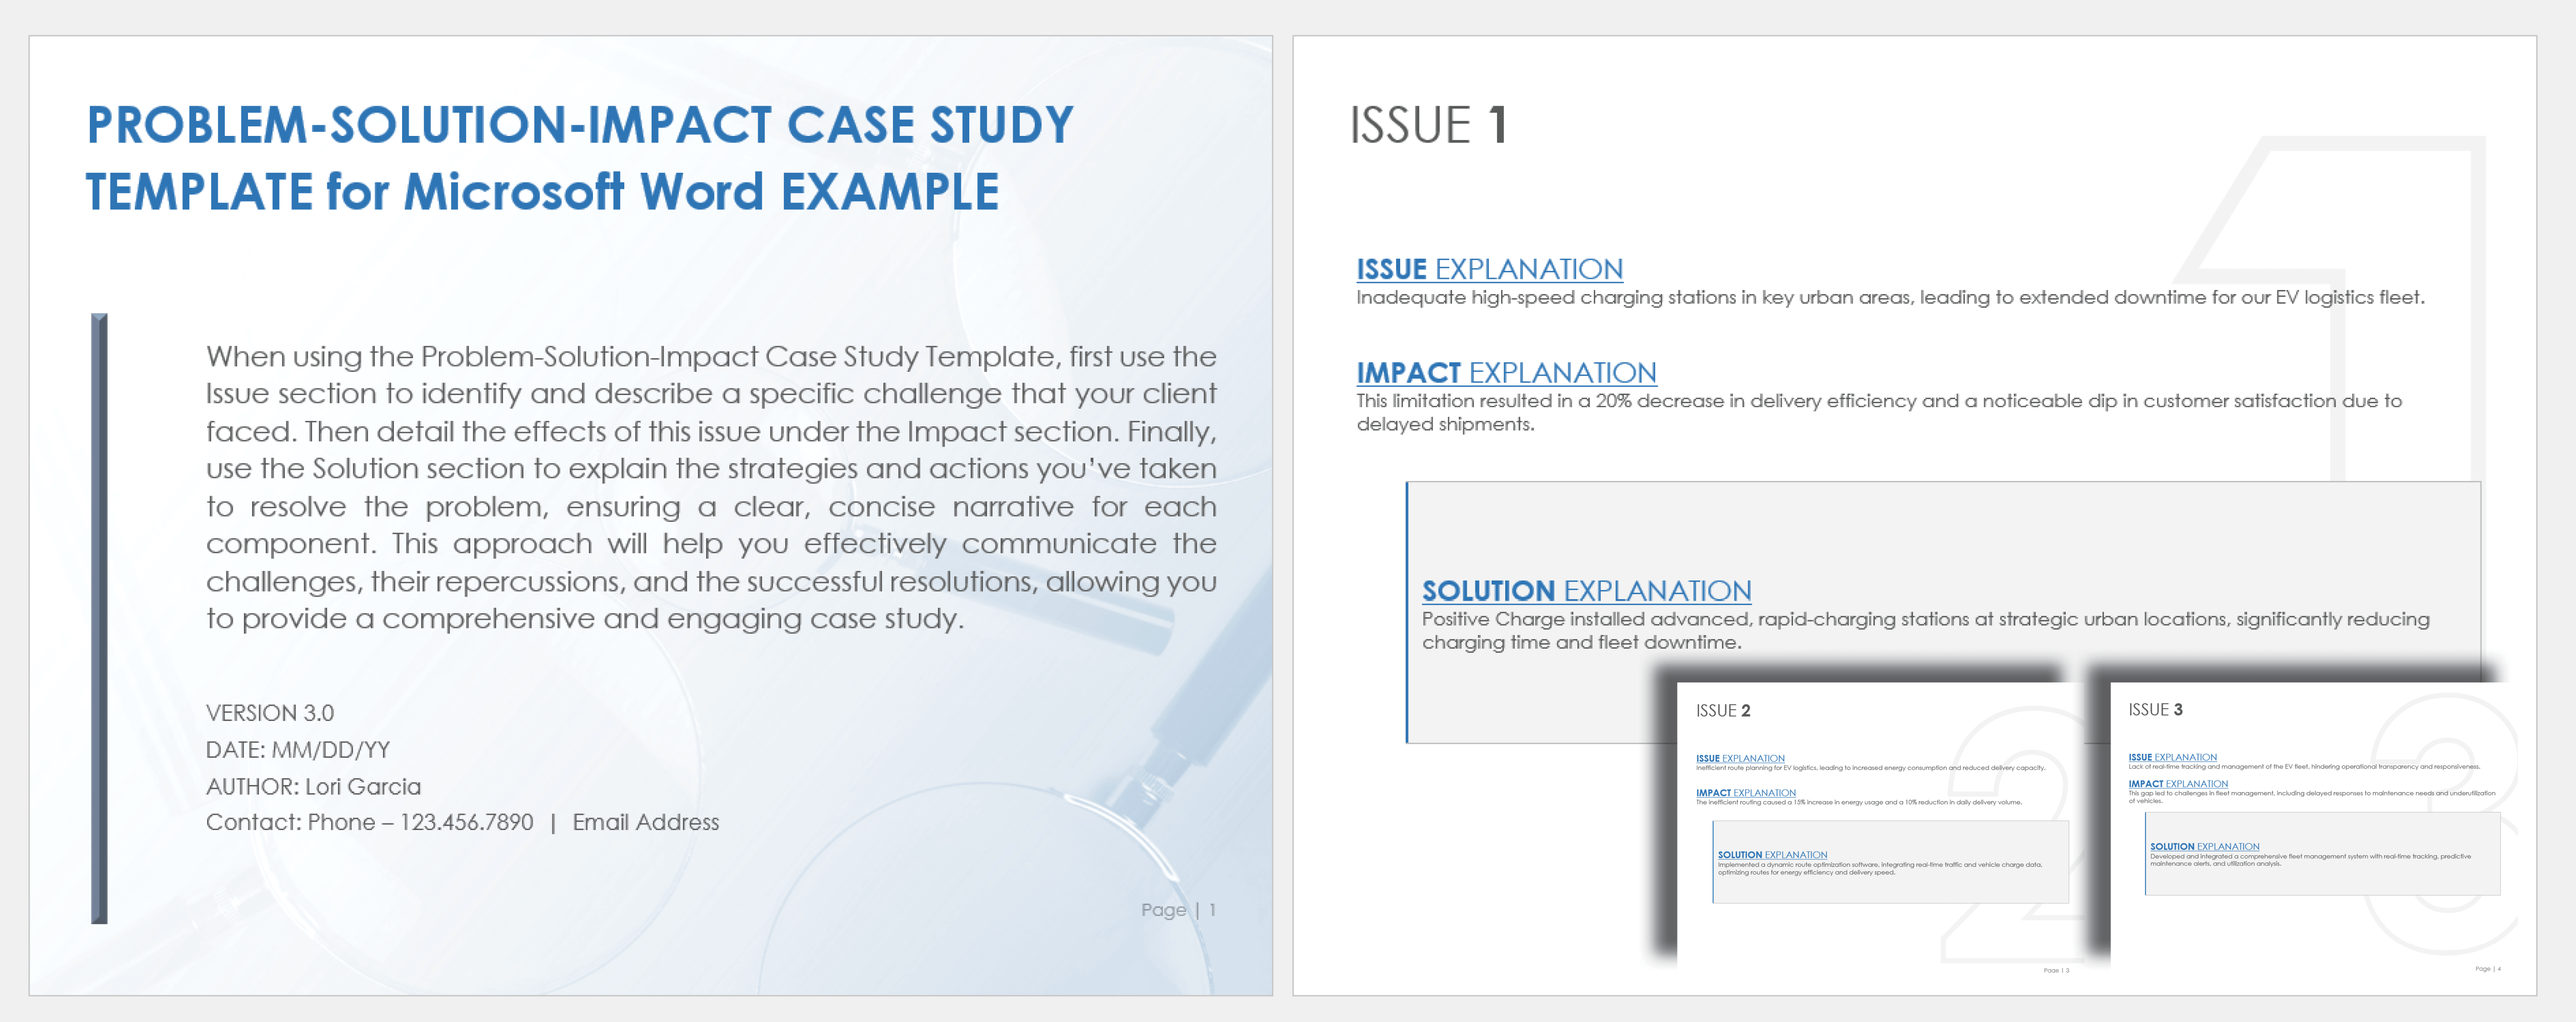 Problem-Solution-Impact Case Study Example Template for Microsoft Word